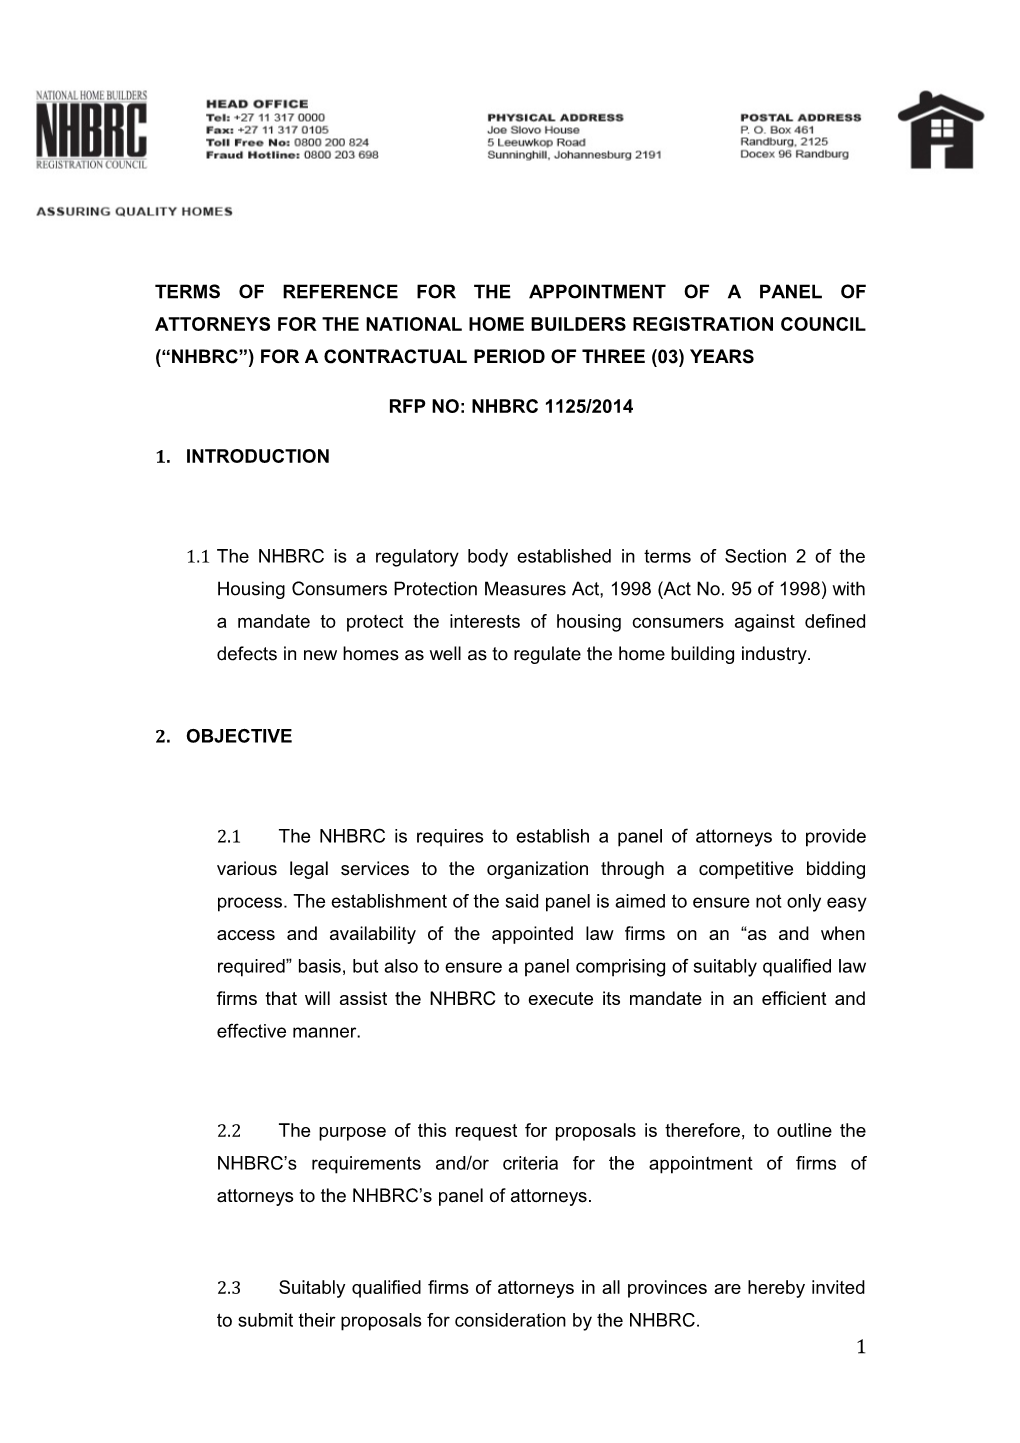 Terms of Reference for the Appointment of a Panel of Attorneys for the National Home Builders